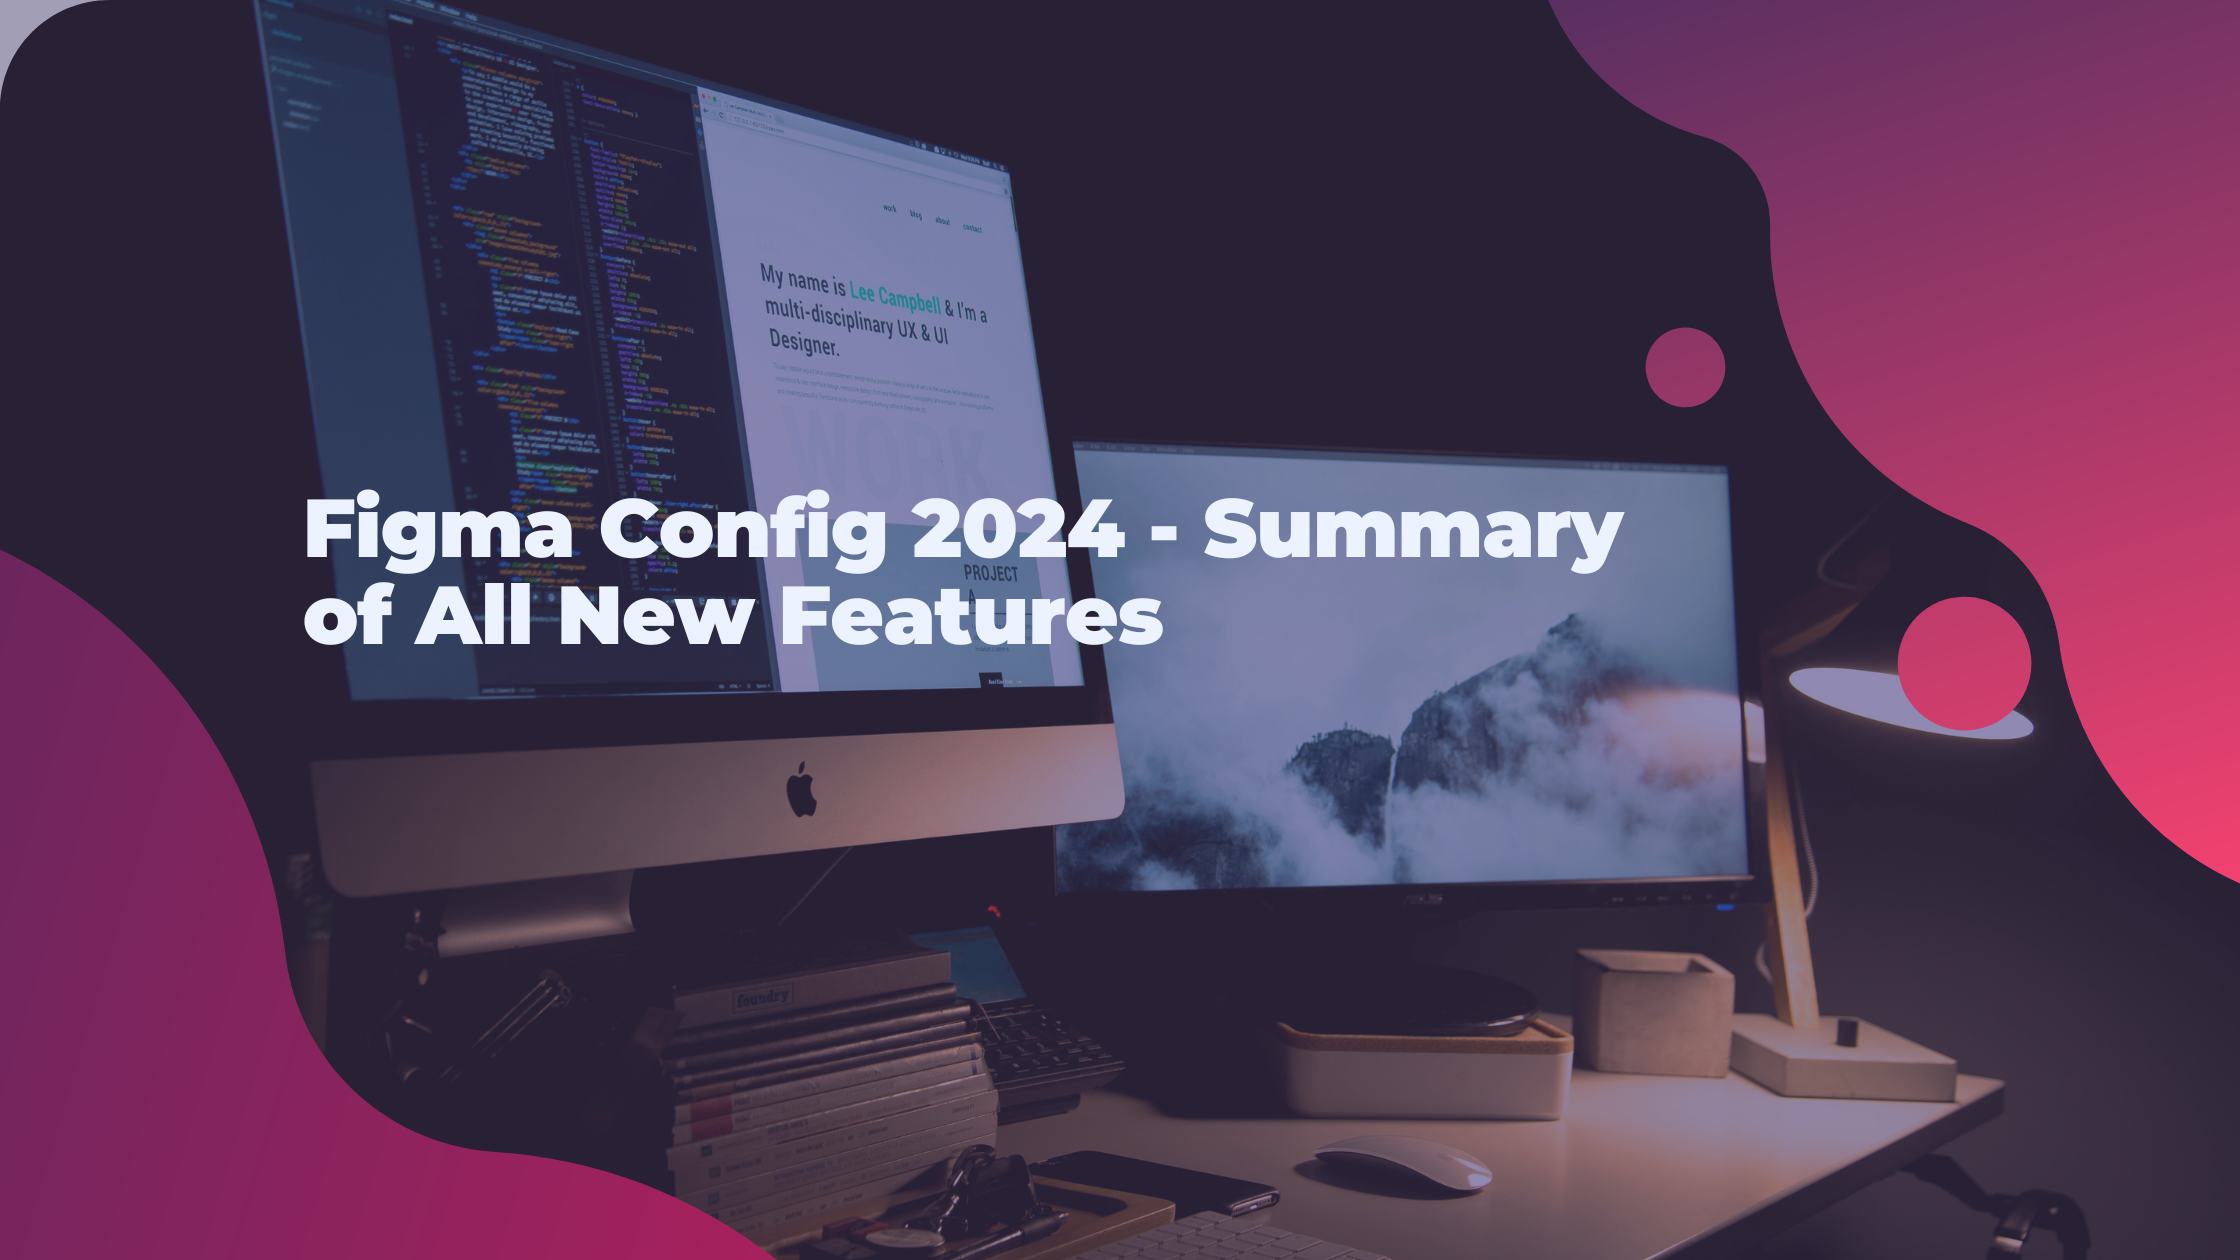 Figma Config 2024 - Summary of All New Features